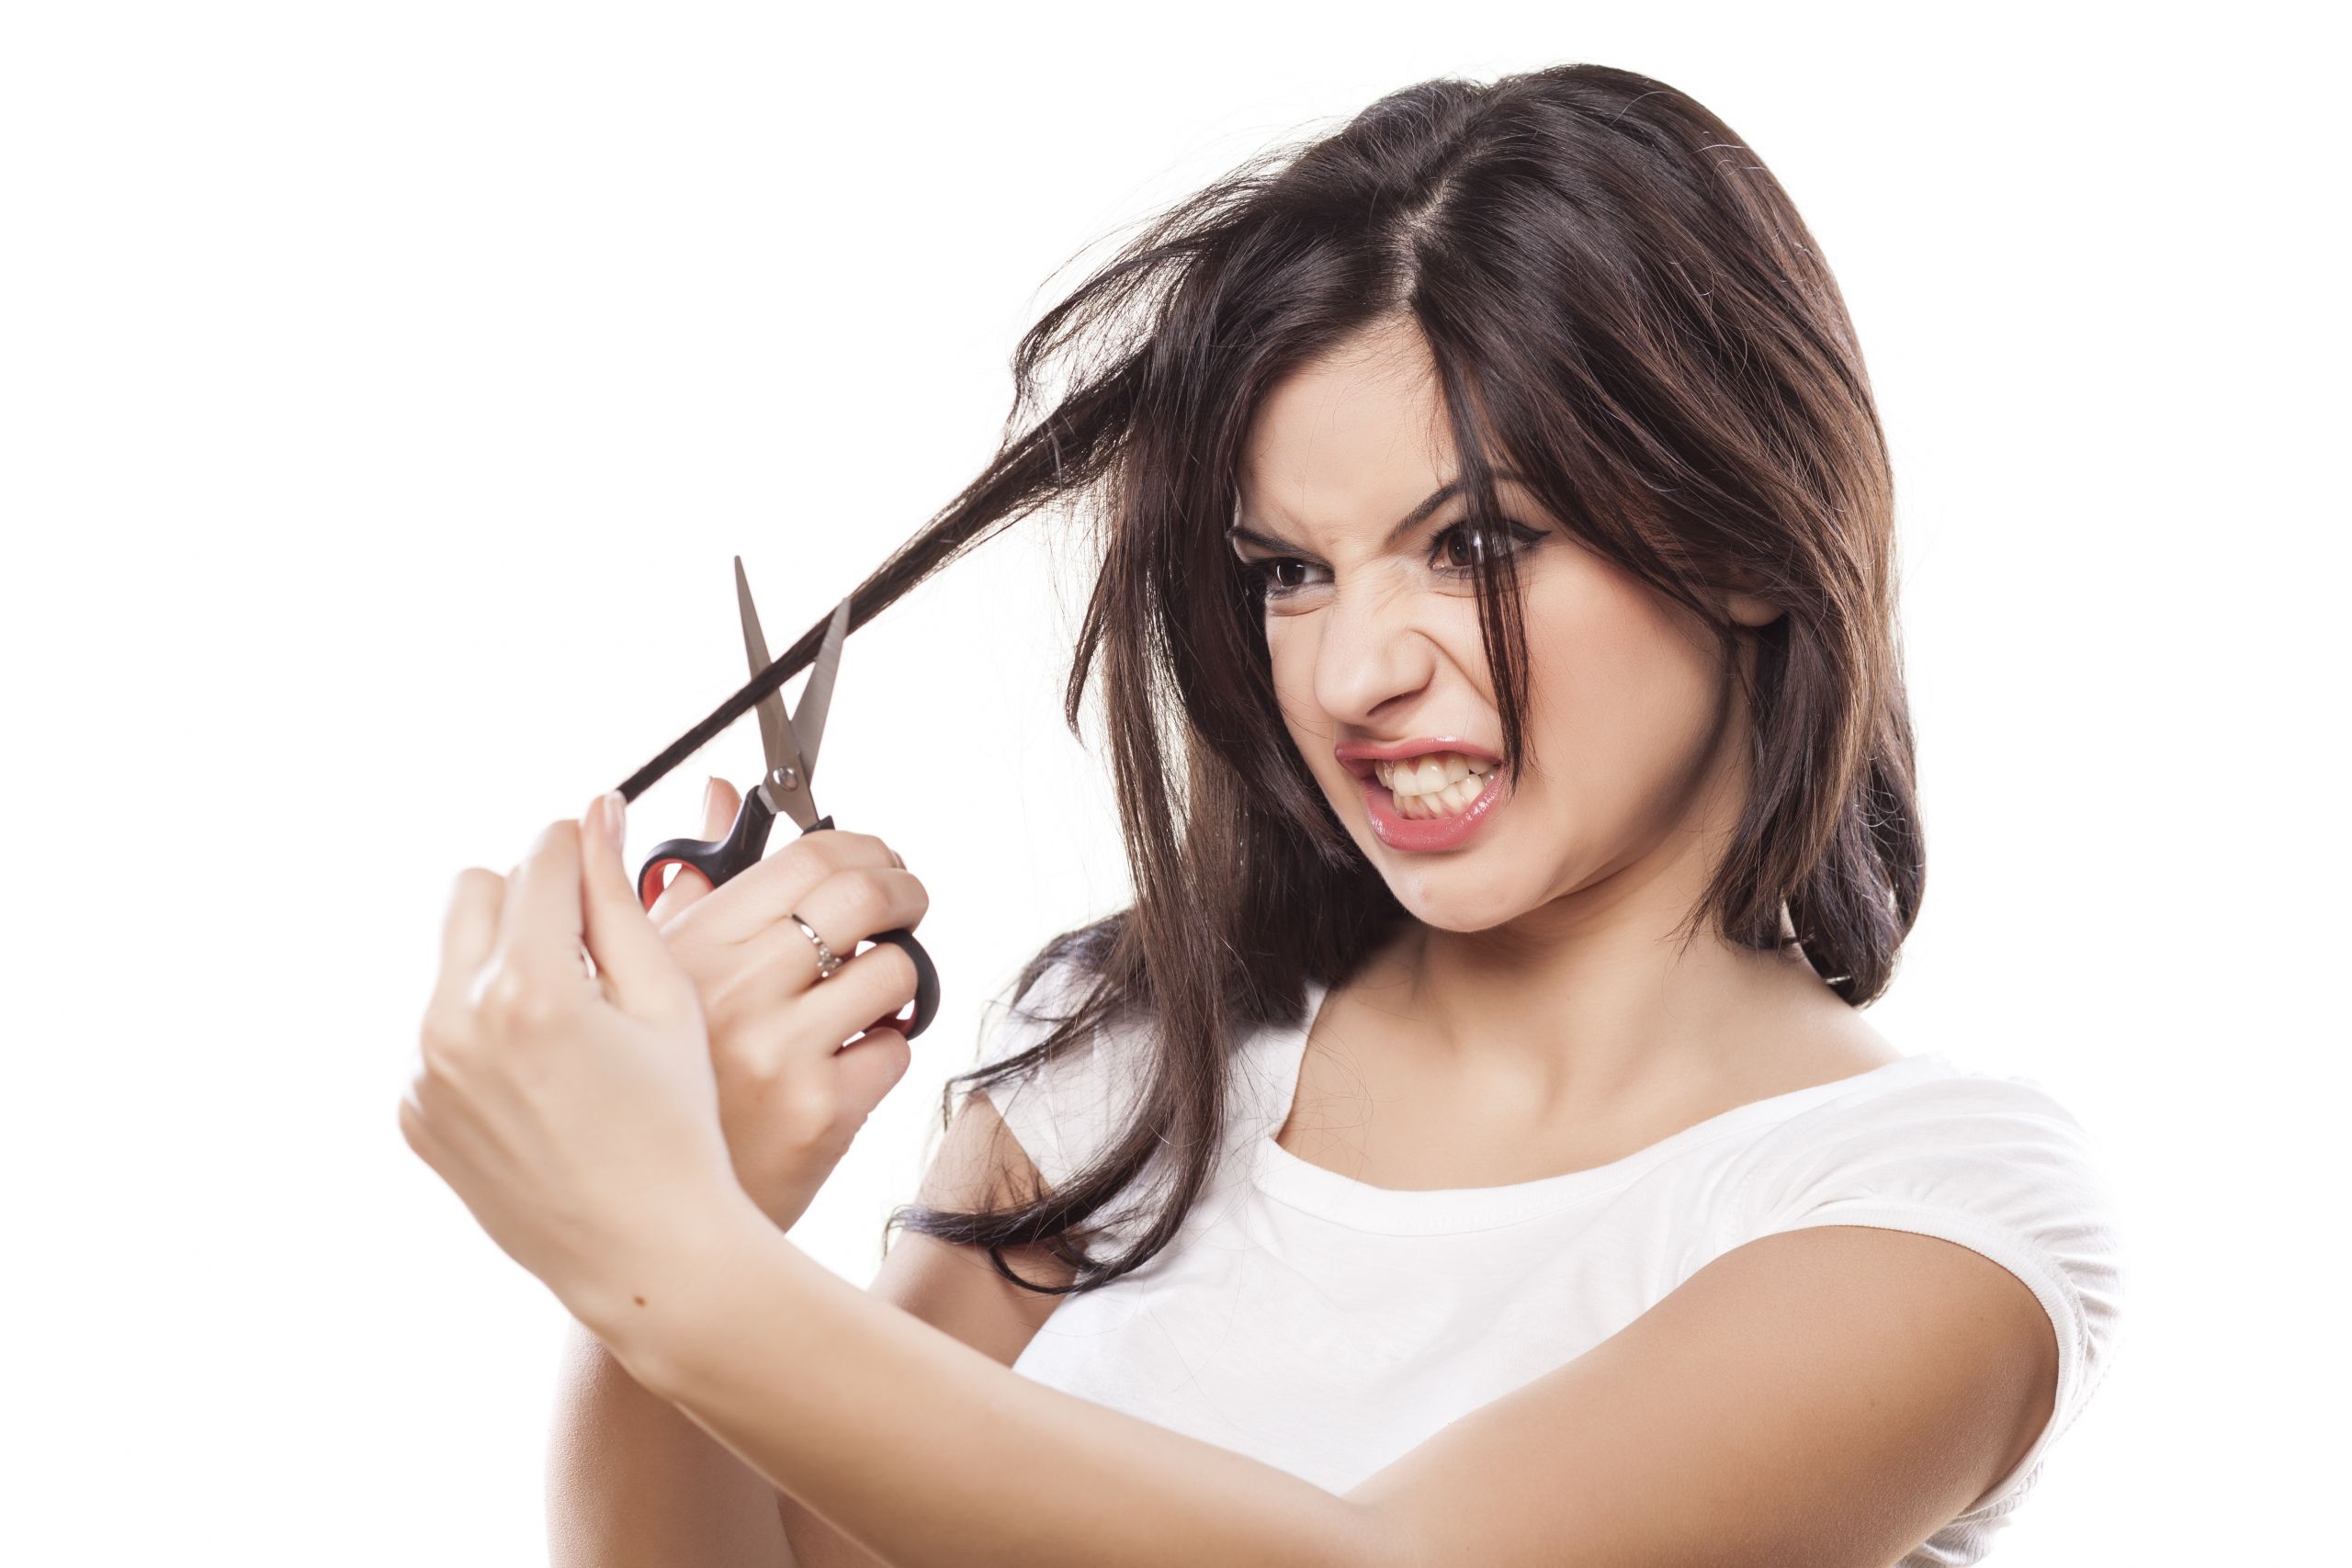 How To Cut Women'S Hair Short With Scissors
 What Your Craving For Change Might Really Mean Money